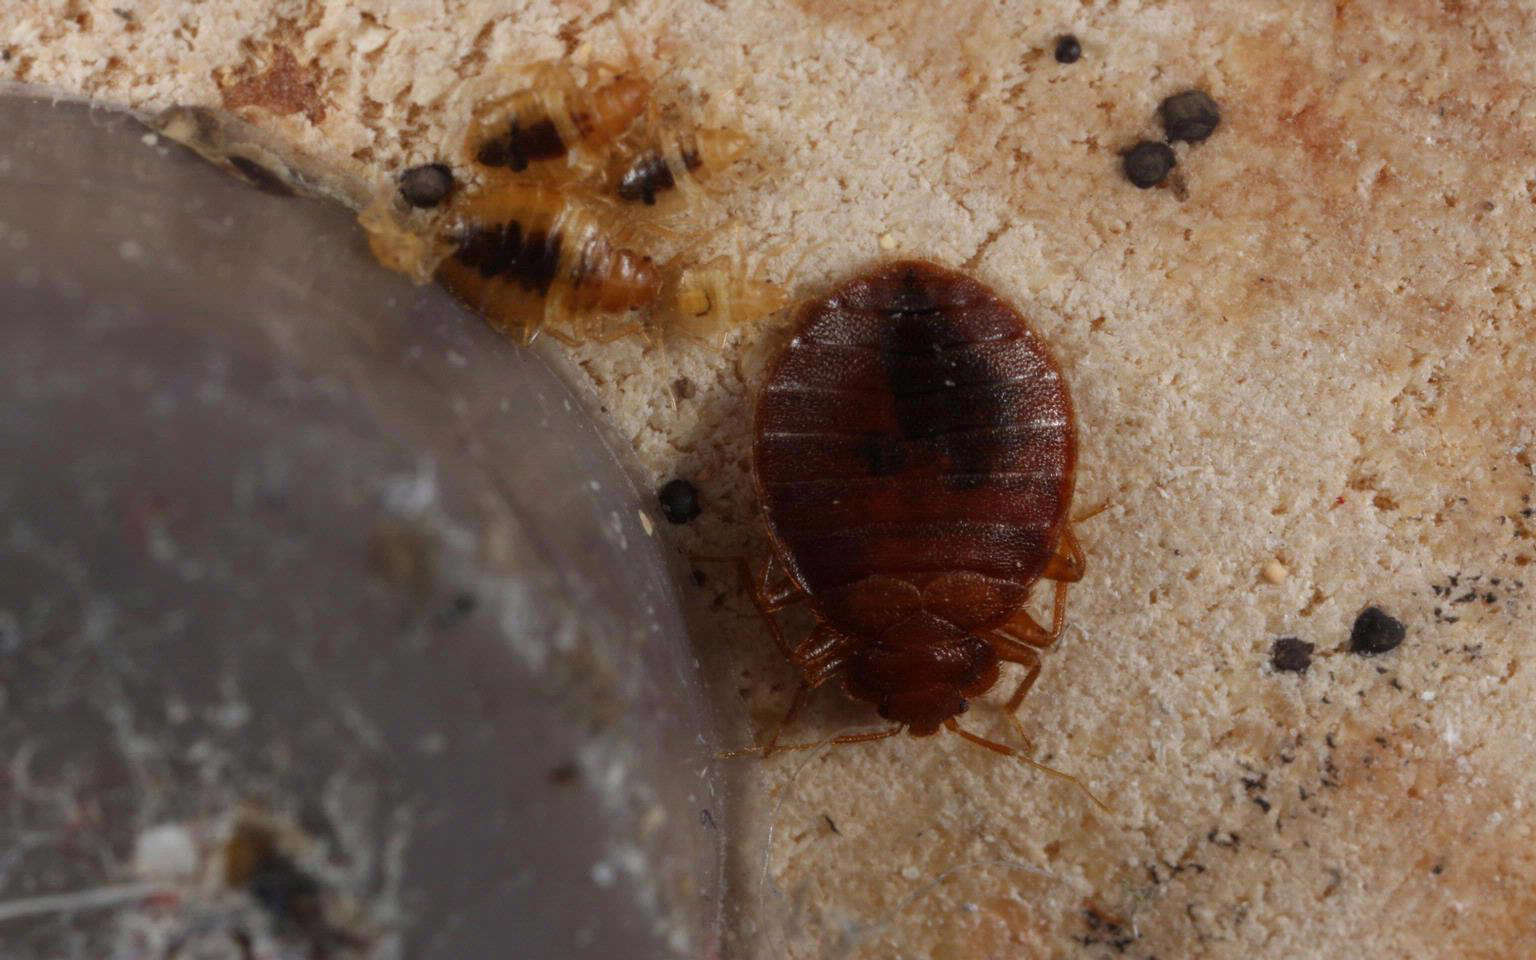 Adult, nymphs, blood spots; The object on the lower left is the screw-in foot of a recliner. The bed bugs are on the underside of a recliner.